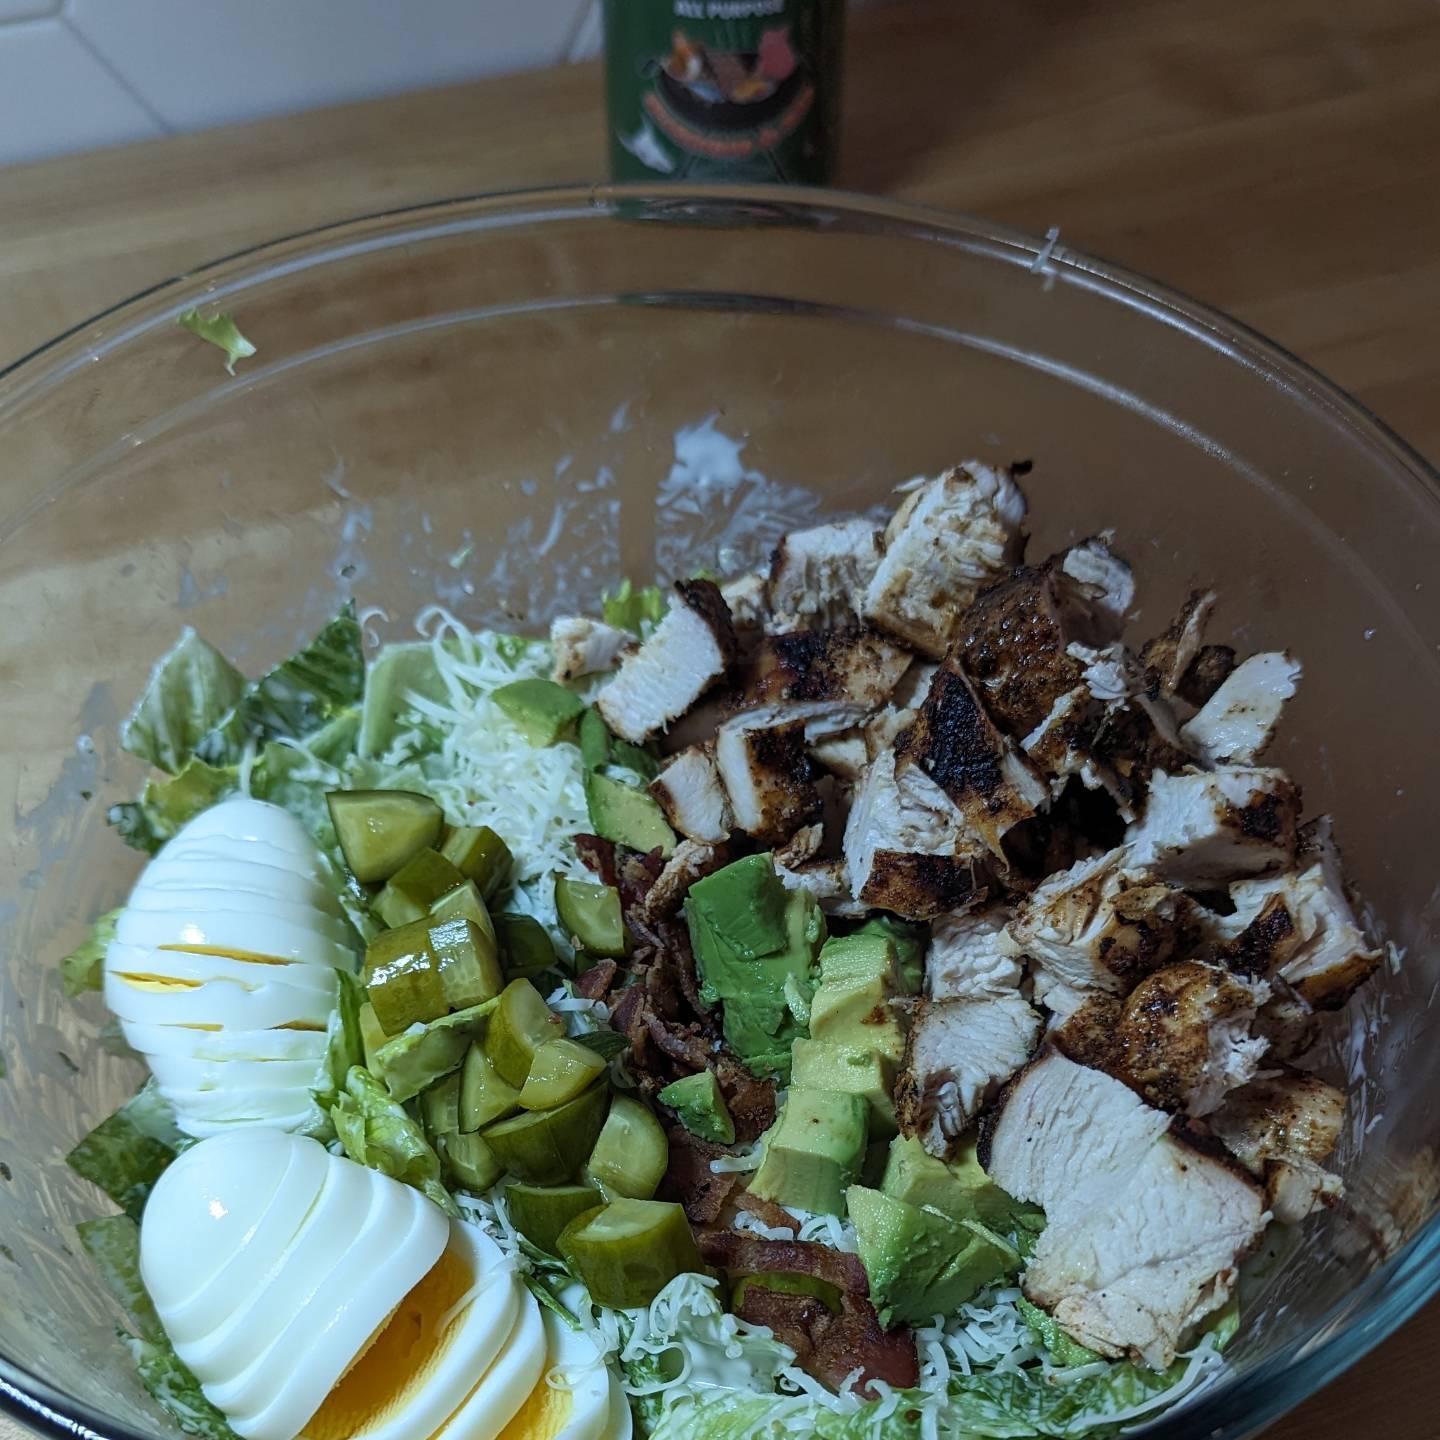 Cobb Salad with grilled chicken breastRomaine lettuce tossed in @litehousefoodsHome style ranch for the base. The chicken was cooked using @bearmountainbbq hickory pellets and seasoned with @neilsarap southwest ap. Joining the chicken was hard boiled eggs, avocado, bacon, pepperjack cheese and diced spicy pickles. Yes, I ate a mixing bowl sized salad. While the bowl isn't full. Tossing everything together is much easier in a giant bowl.#cobbsalad #saladsofinstagram #grilledchicken #bearmountainbbq #eatinghealthy #dinnersalad #loadedsalad